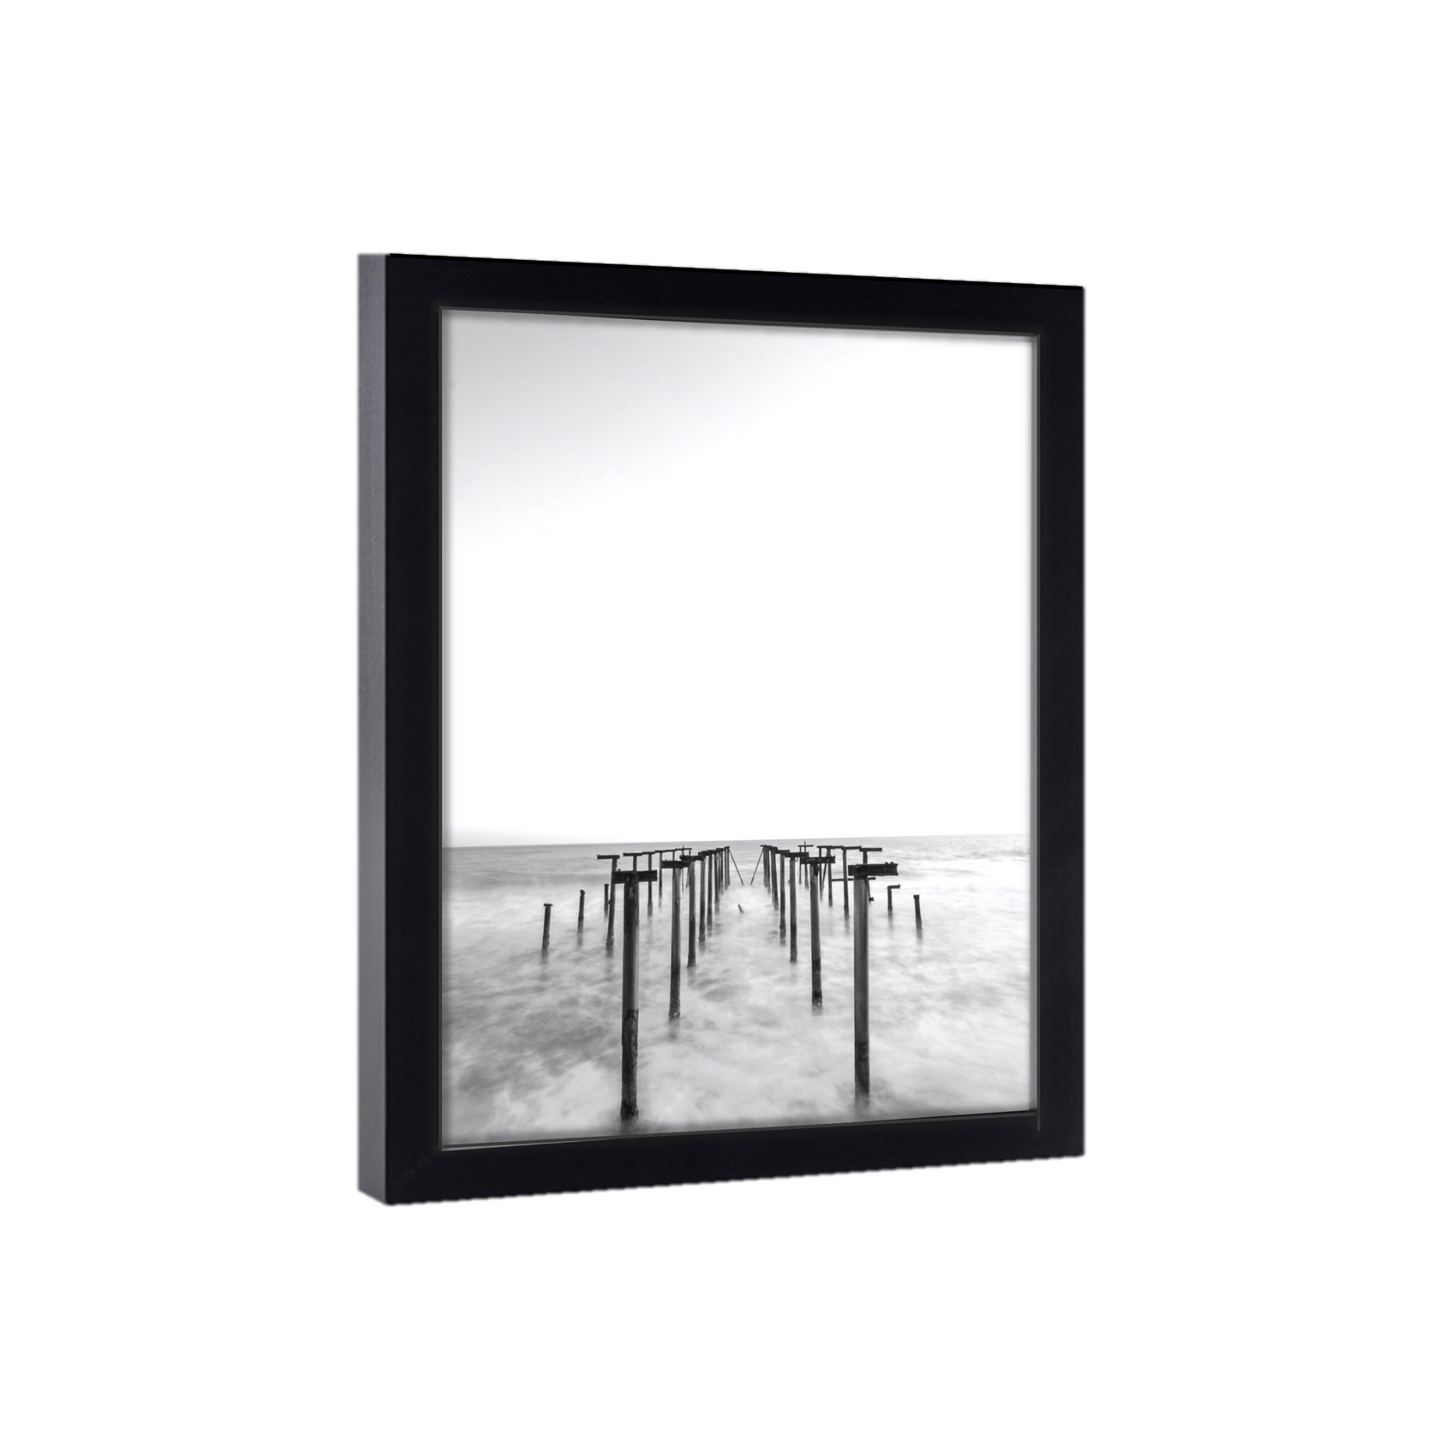 Gallery Wall 11x41 Picture Frame Black Wood 11x41  Poster Size